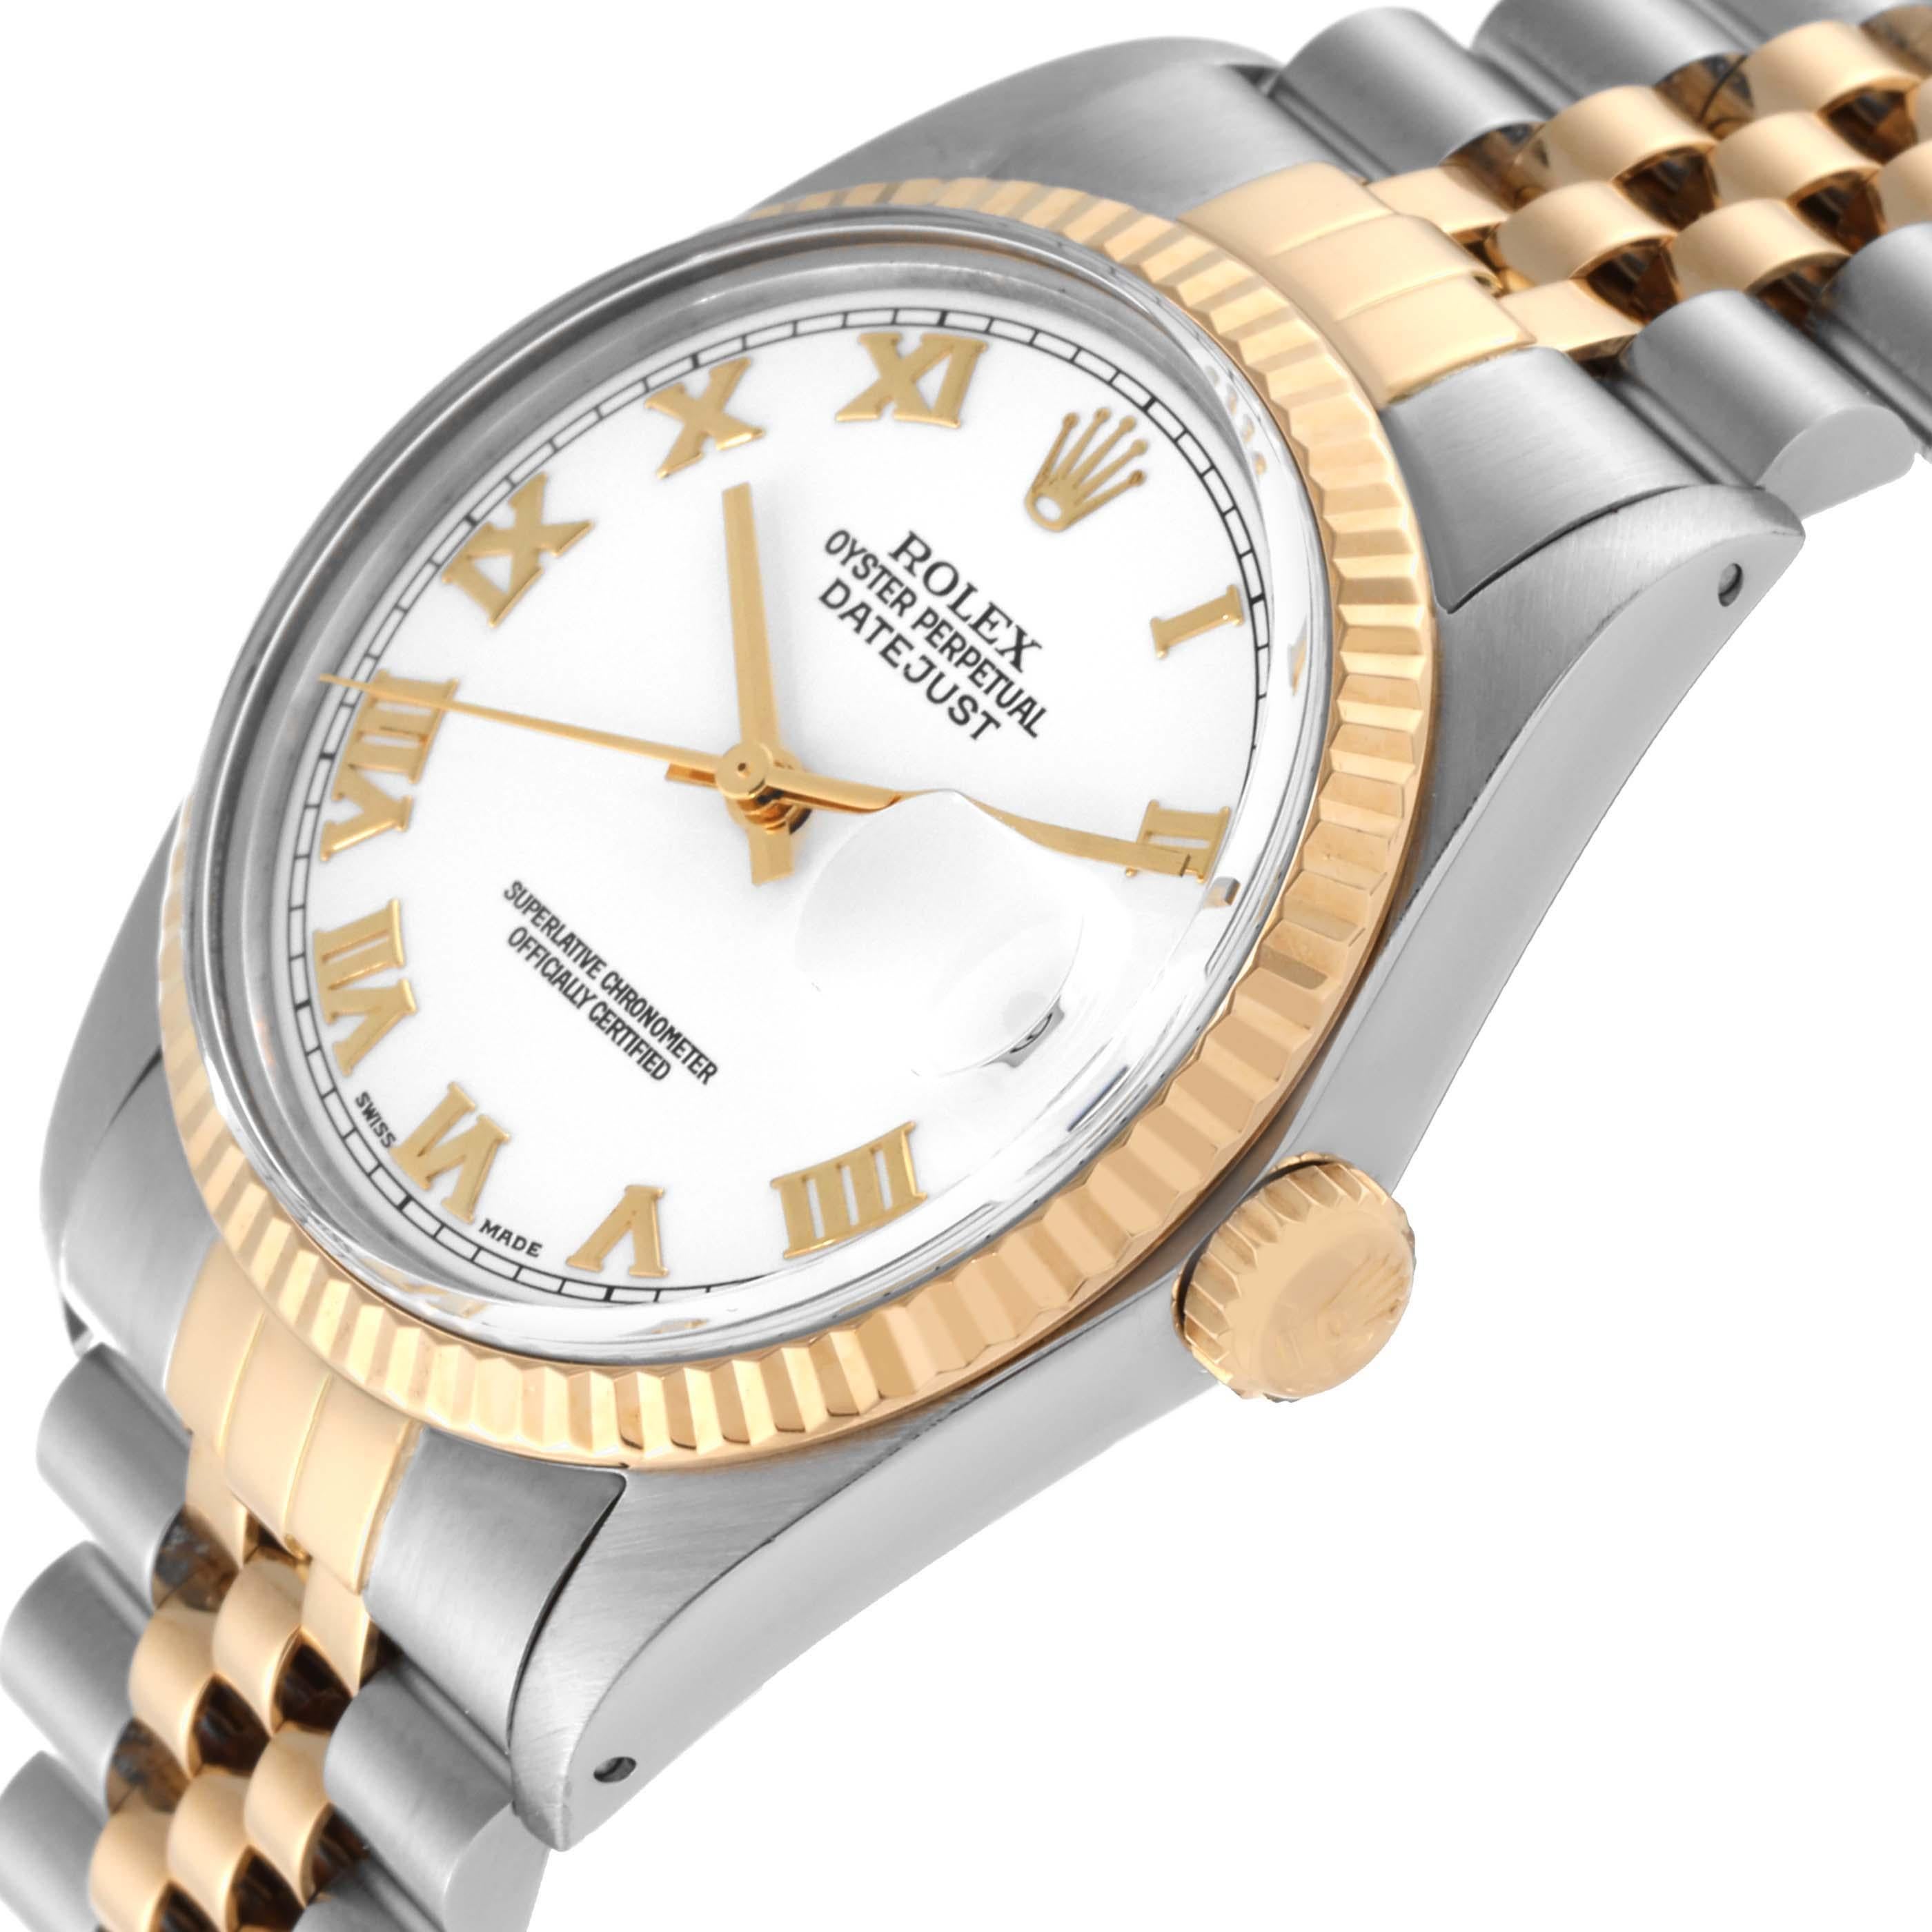 Rolex Datejust Steel Yellow Gold White Dial Vintage Mens Watch 16013 Box Papers For Sale 5